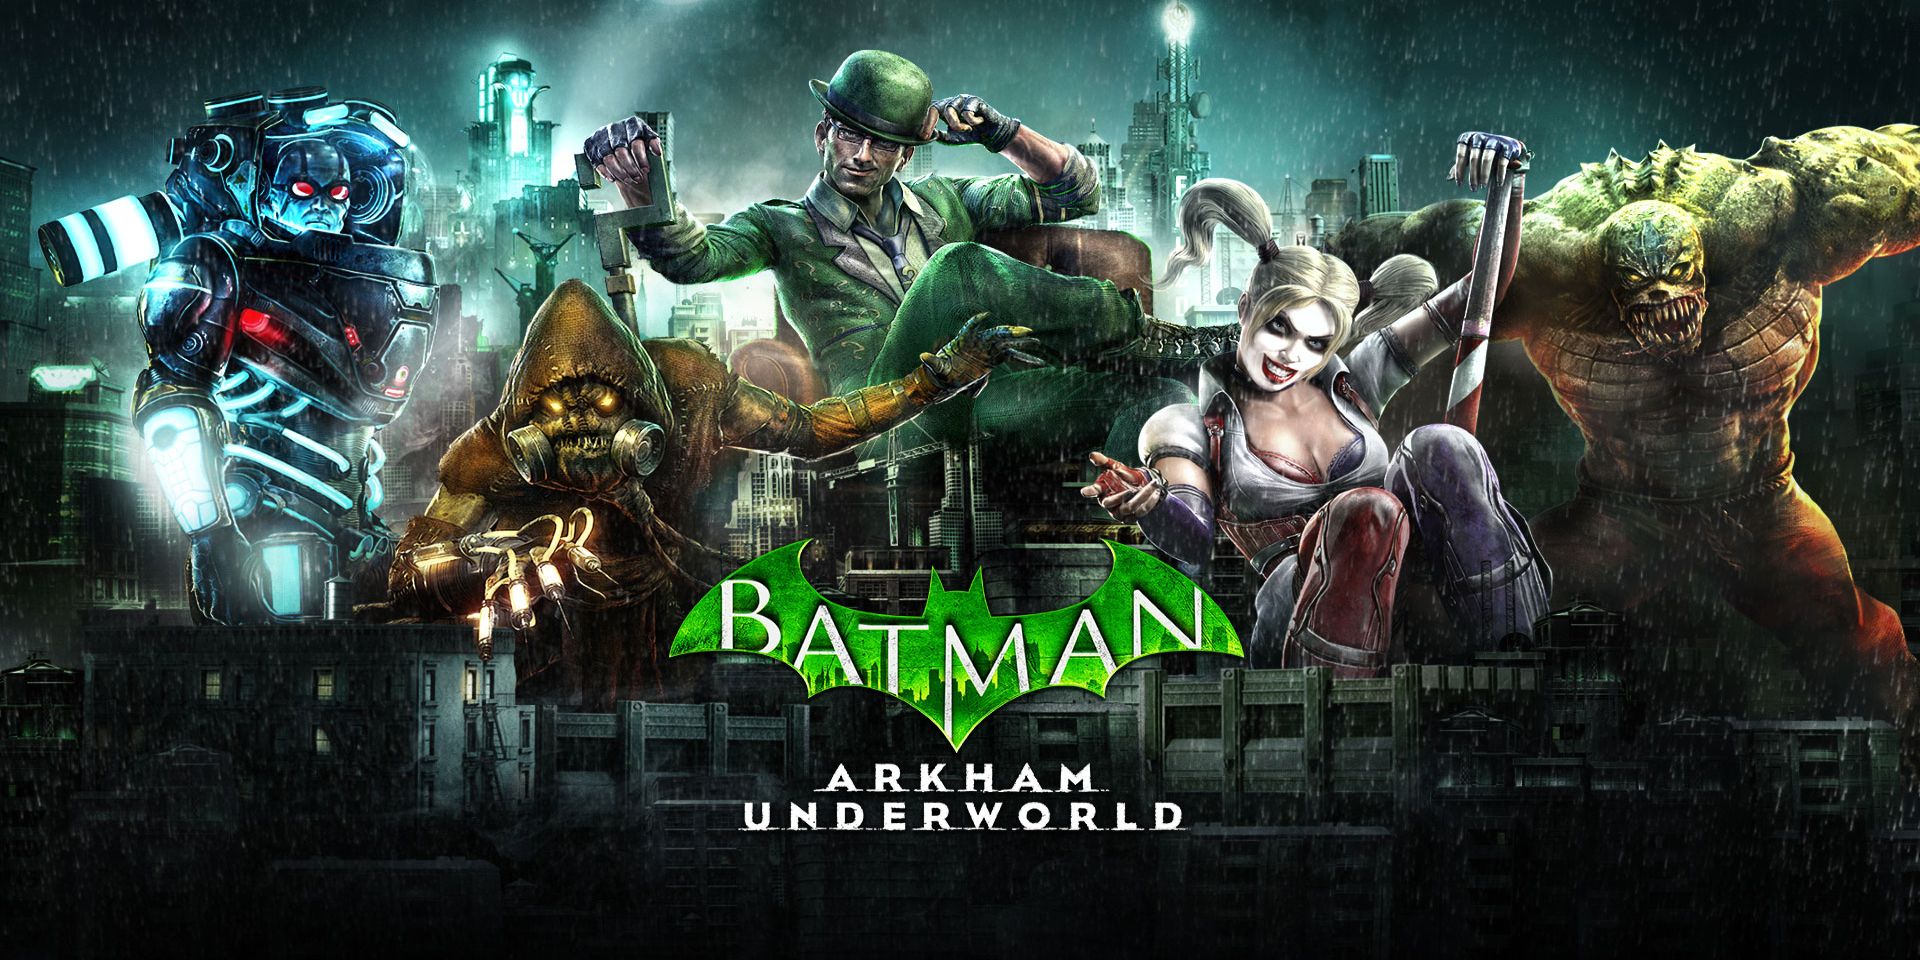 A promotional image for the defunct mobile game Batman Arkham Underworld.